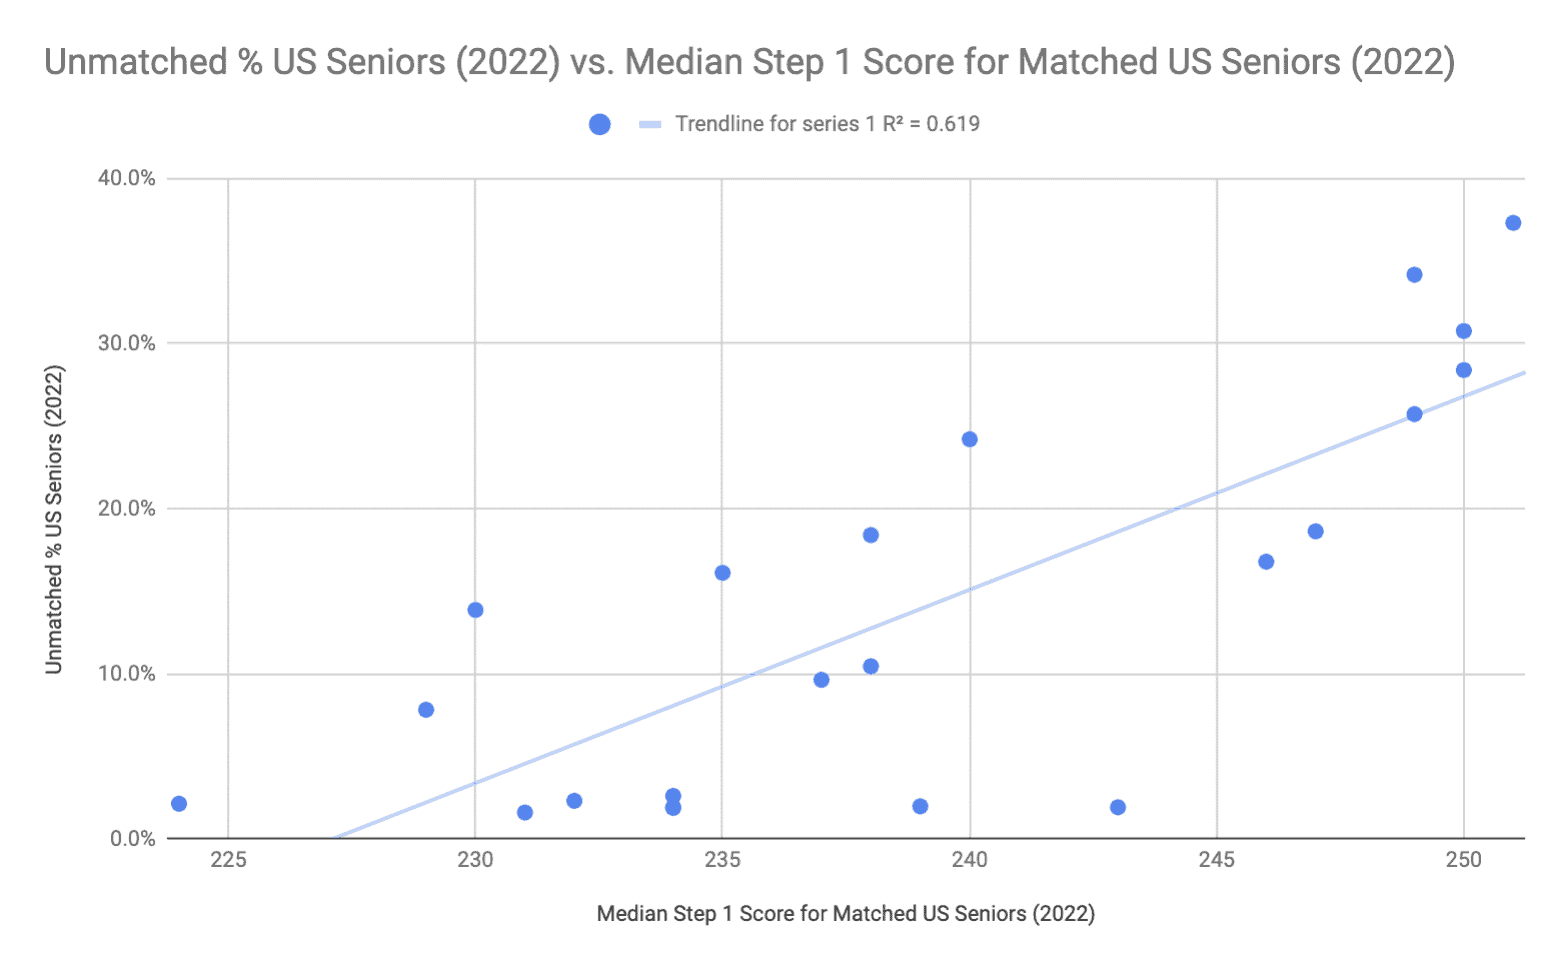 Median Step 1 vs. Unmatched % in 2022 Match